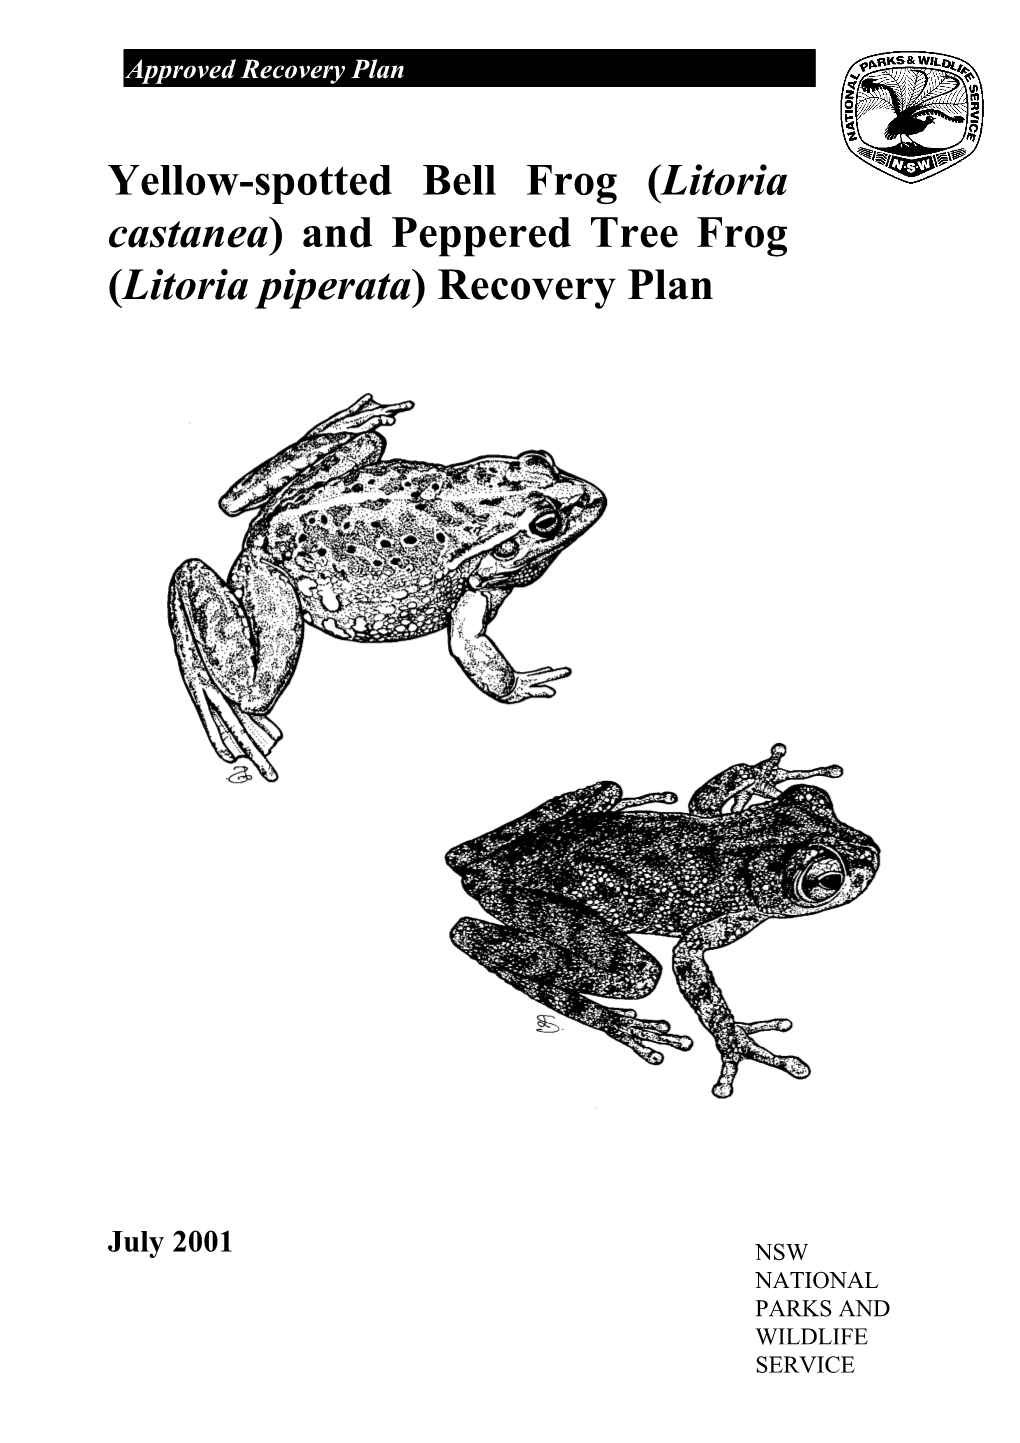 Yellow-Spotted Bell Frog (Litoria Castanea) and Peppered Tree Frog (Litoria Piperata) Recovery Plan